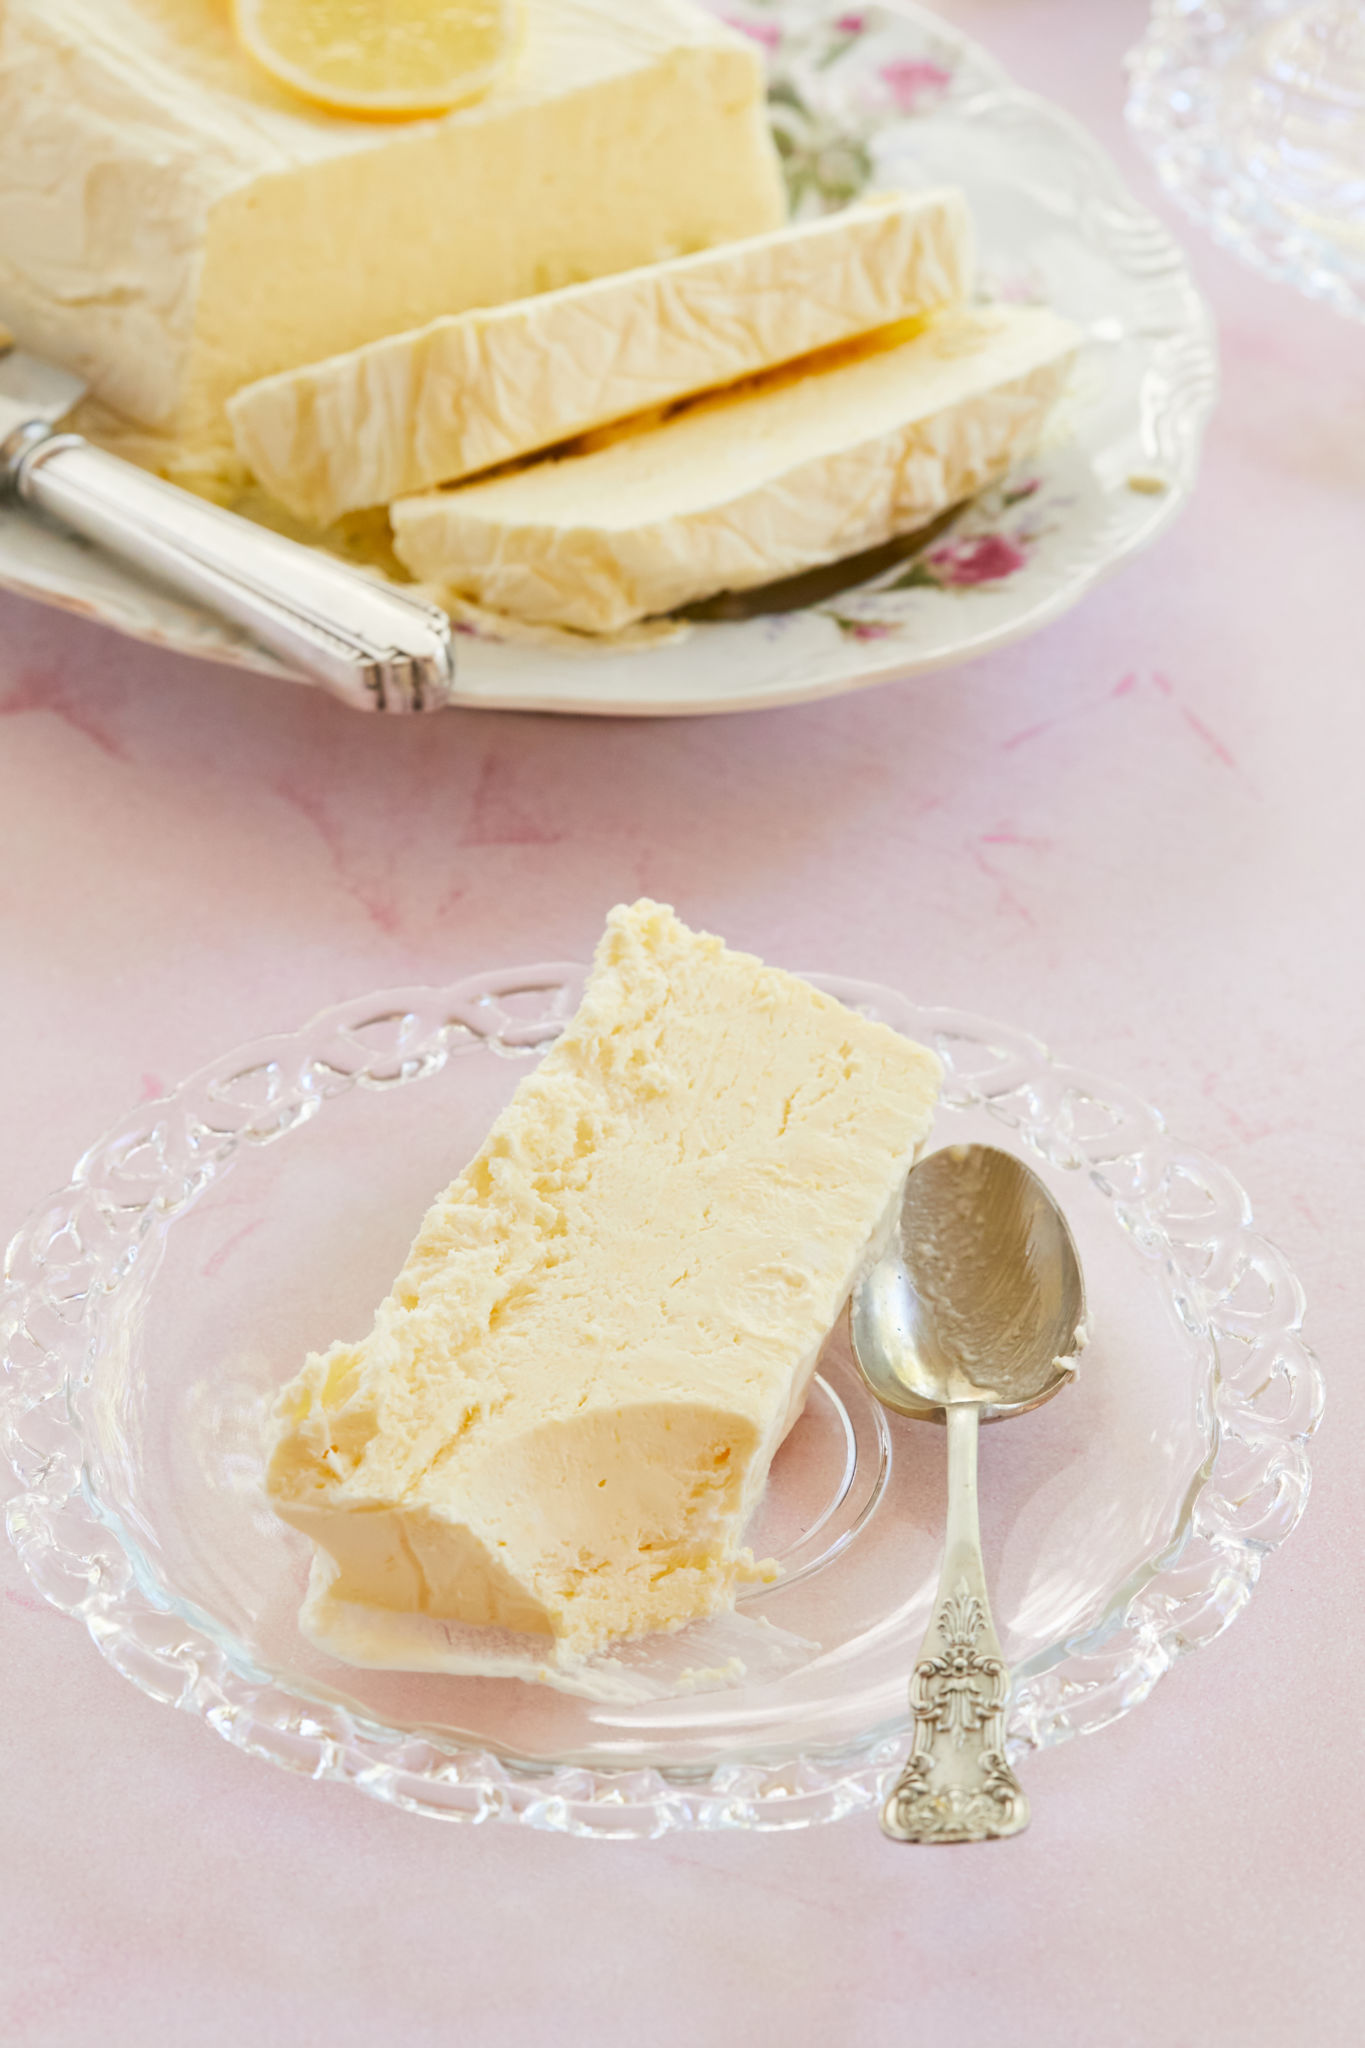 A slice of Lemon Semifreddo with a spoonful removed.